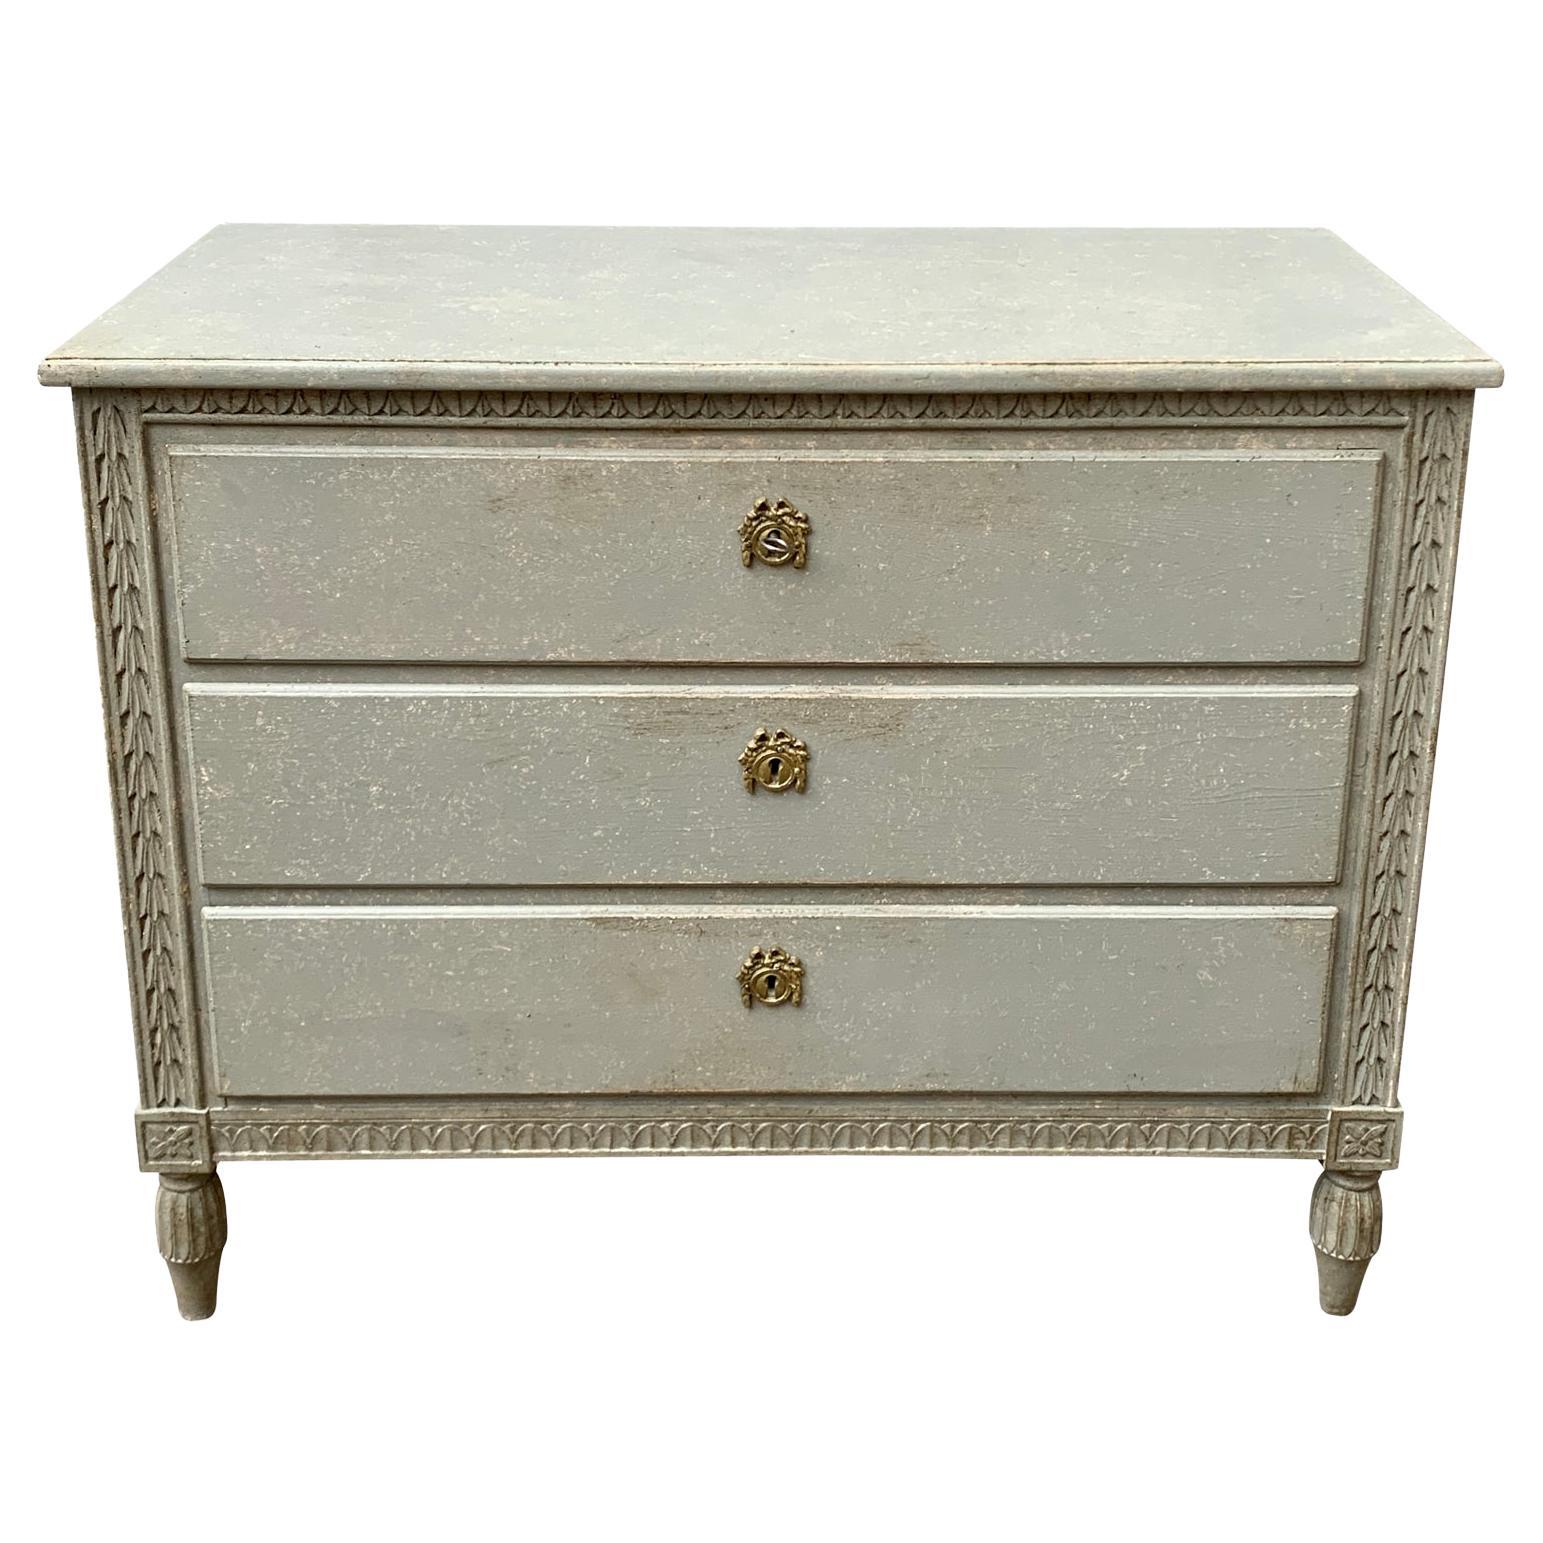 Gustavian Style Painted 3 Drawer Dresser From Sweden